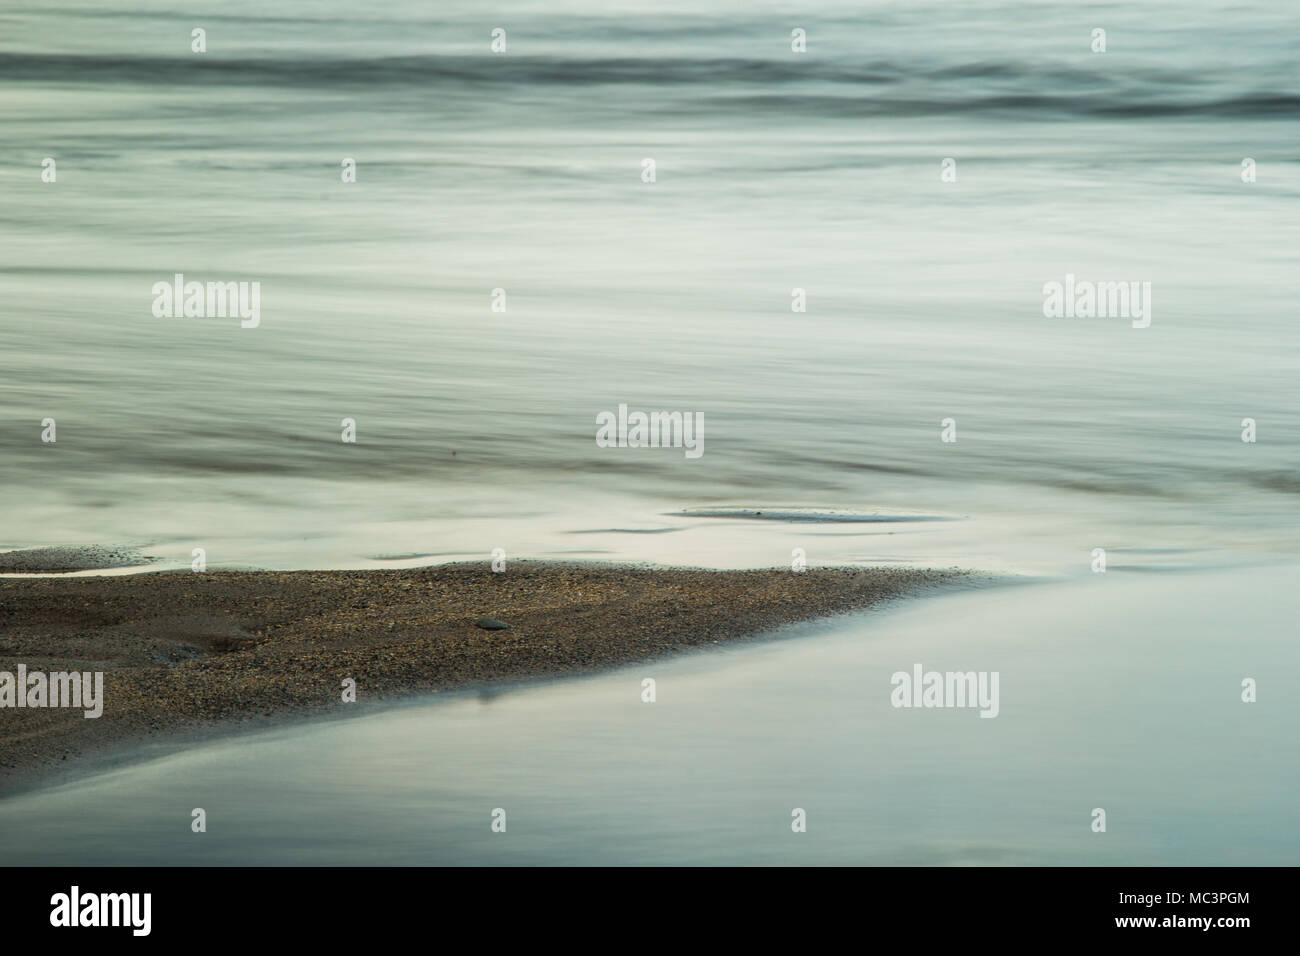 Abstract photo of a spit of sand protruding into the sea with a slow shutter speed Stock Photo